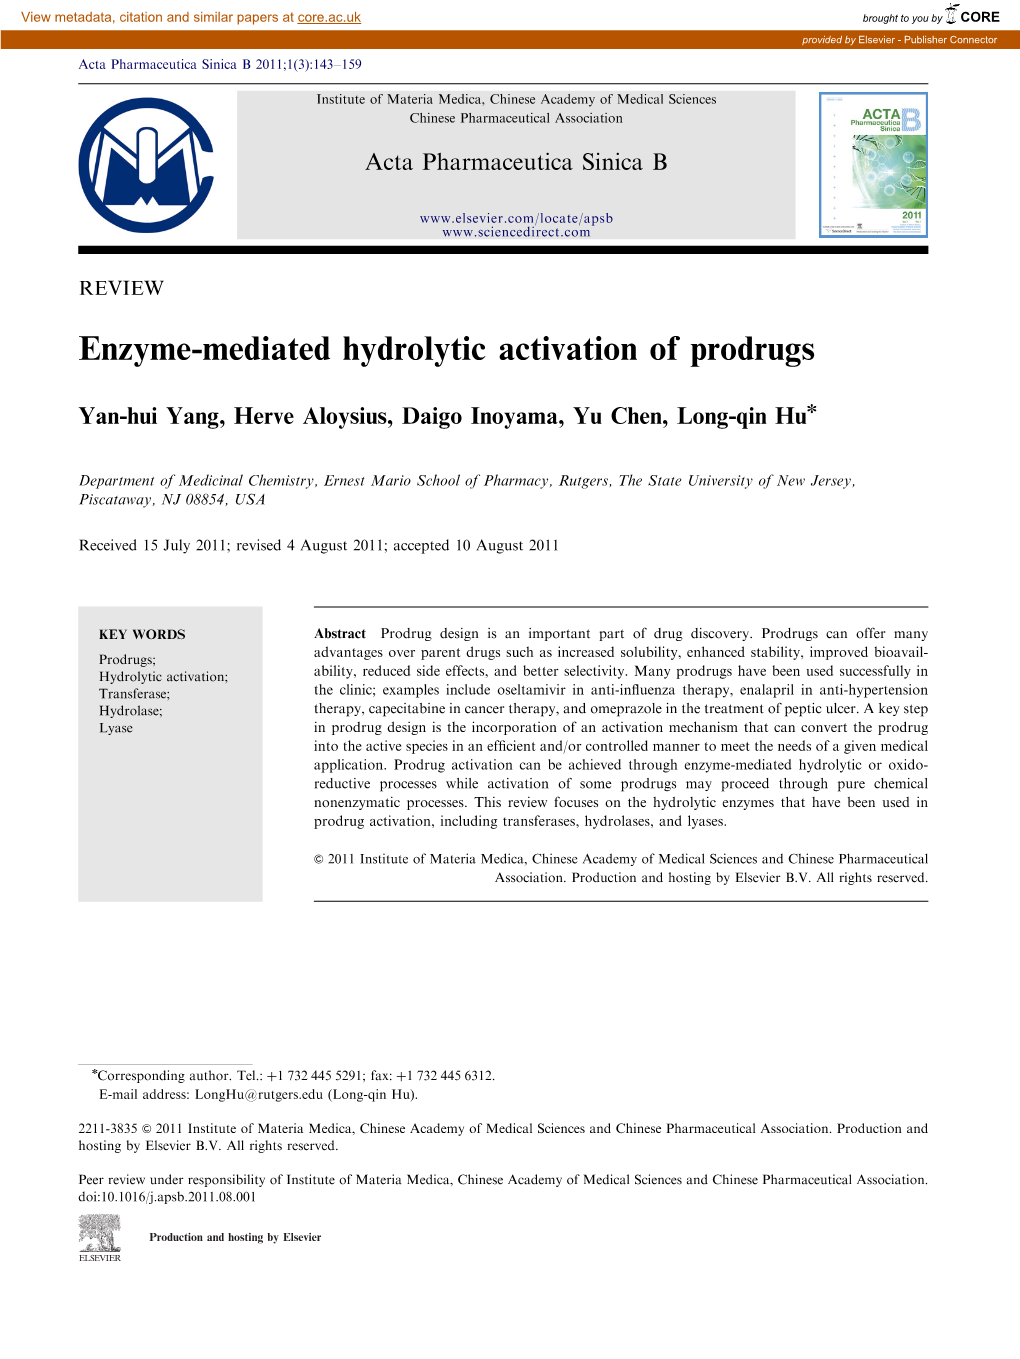 Enzyme-Mediated Hydrolytic Activation of Prodrugs